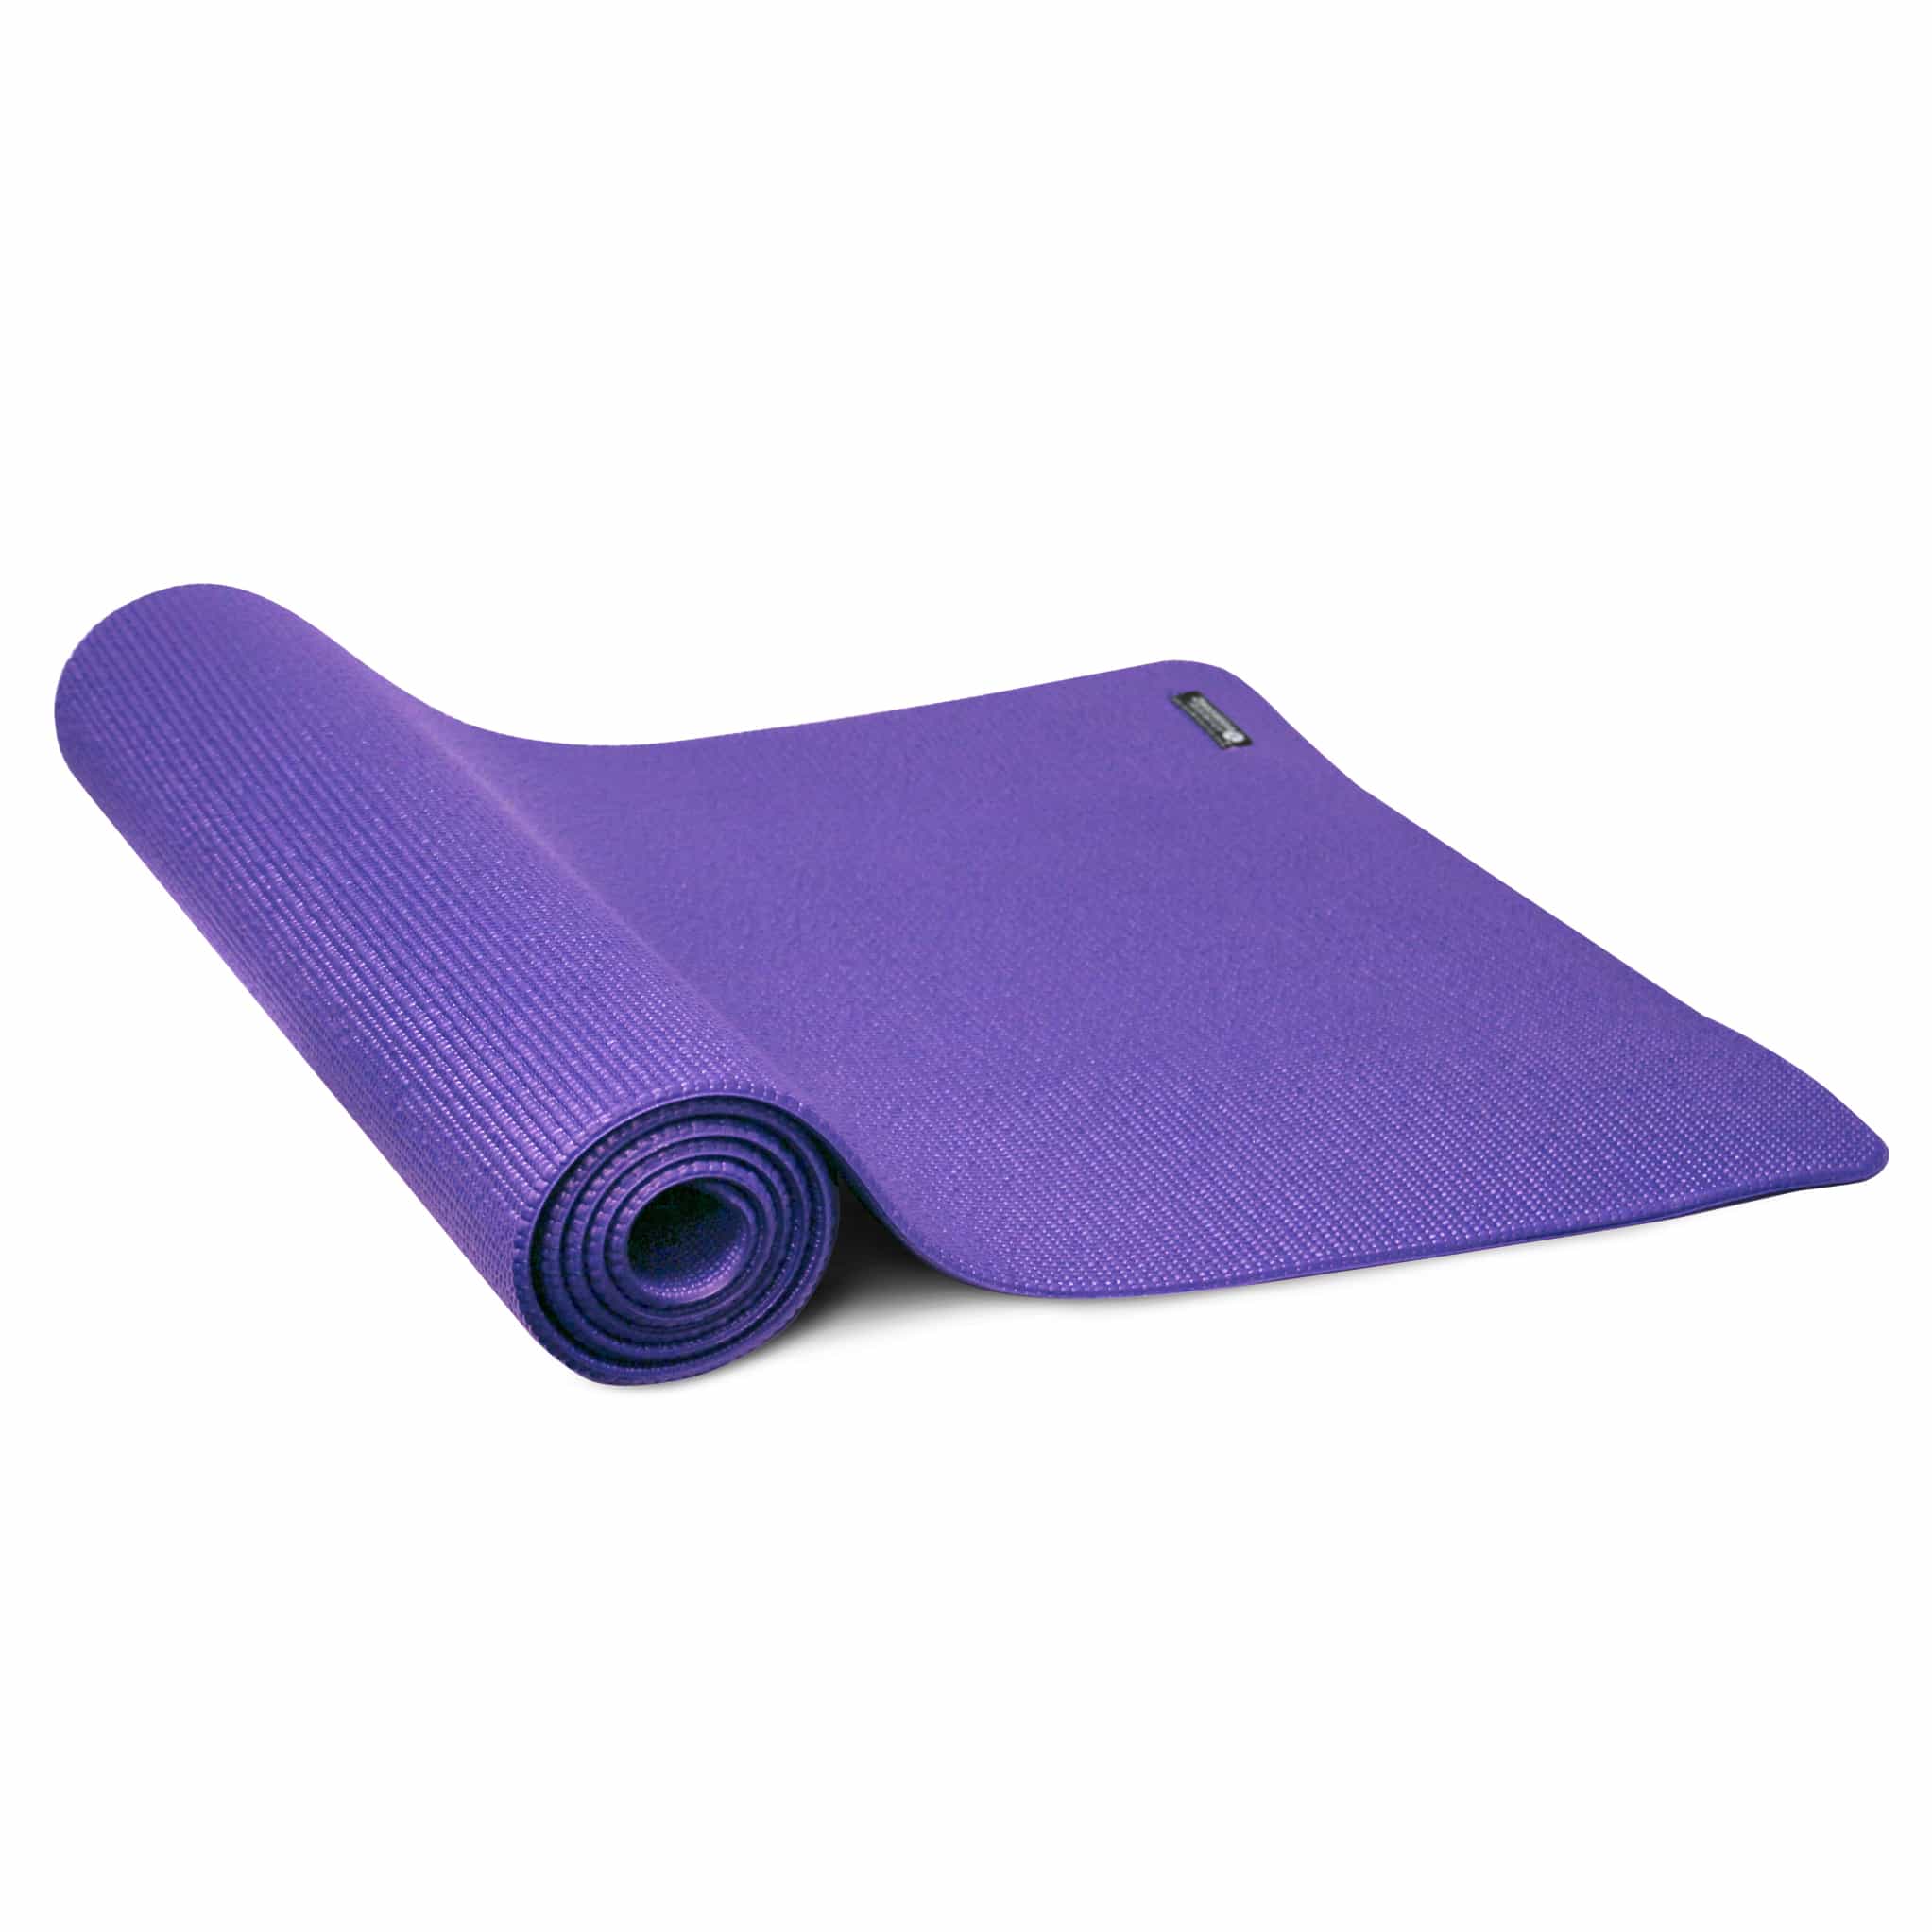 Yoga Mats for sale in Thornhill, Ontario, Facebook Marketplace